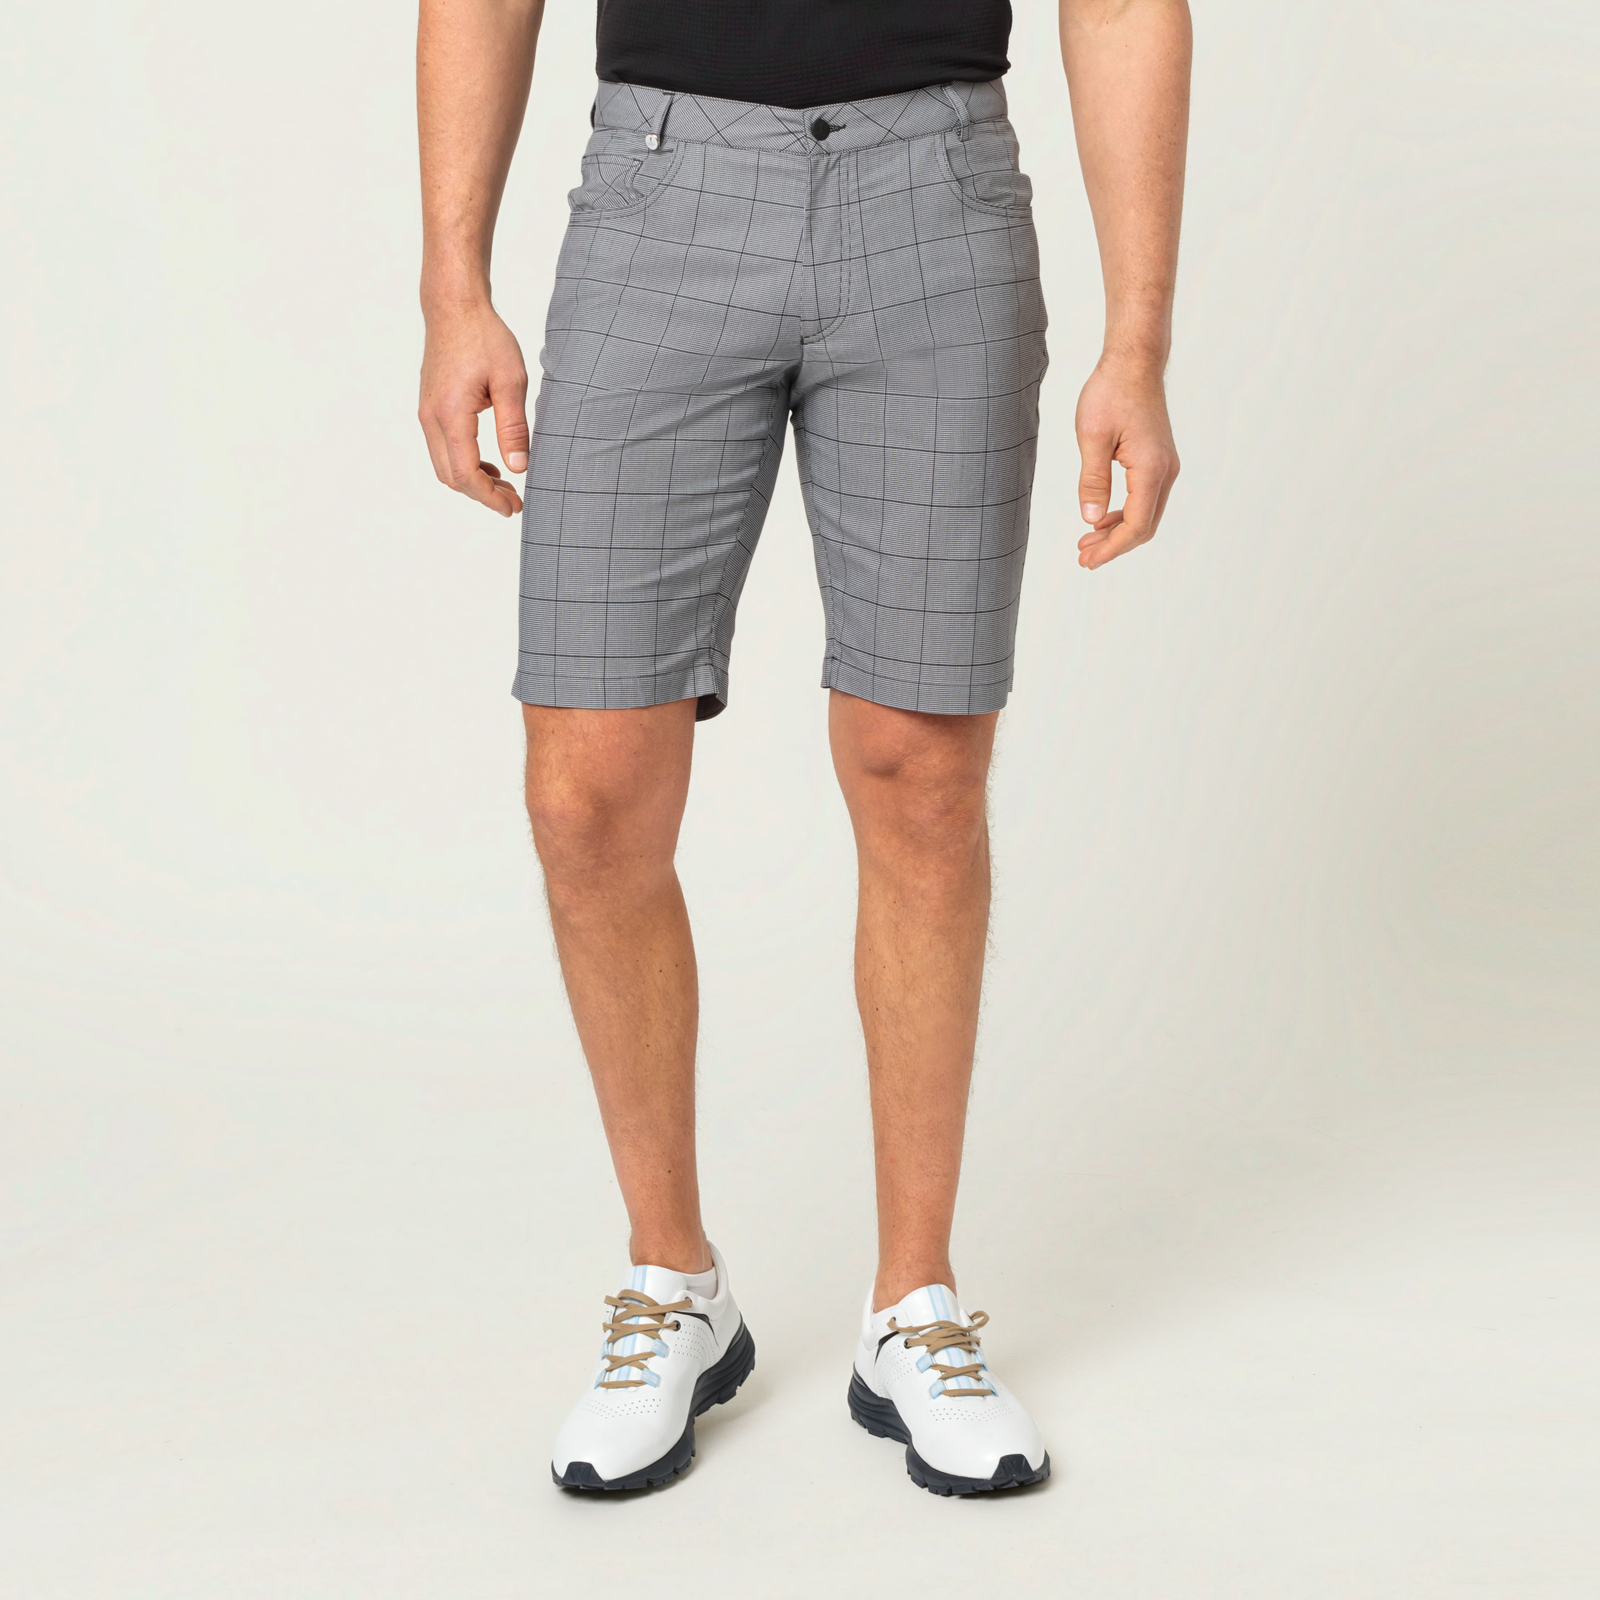 Men's slim fit checked Bermuda-style shorts made from stretch material 